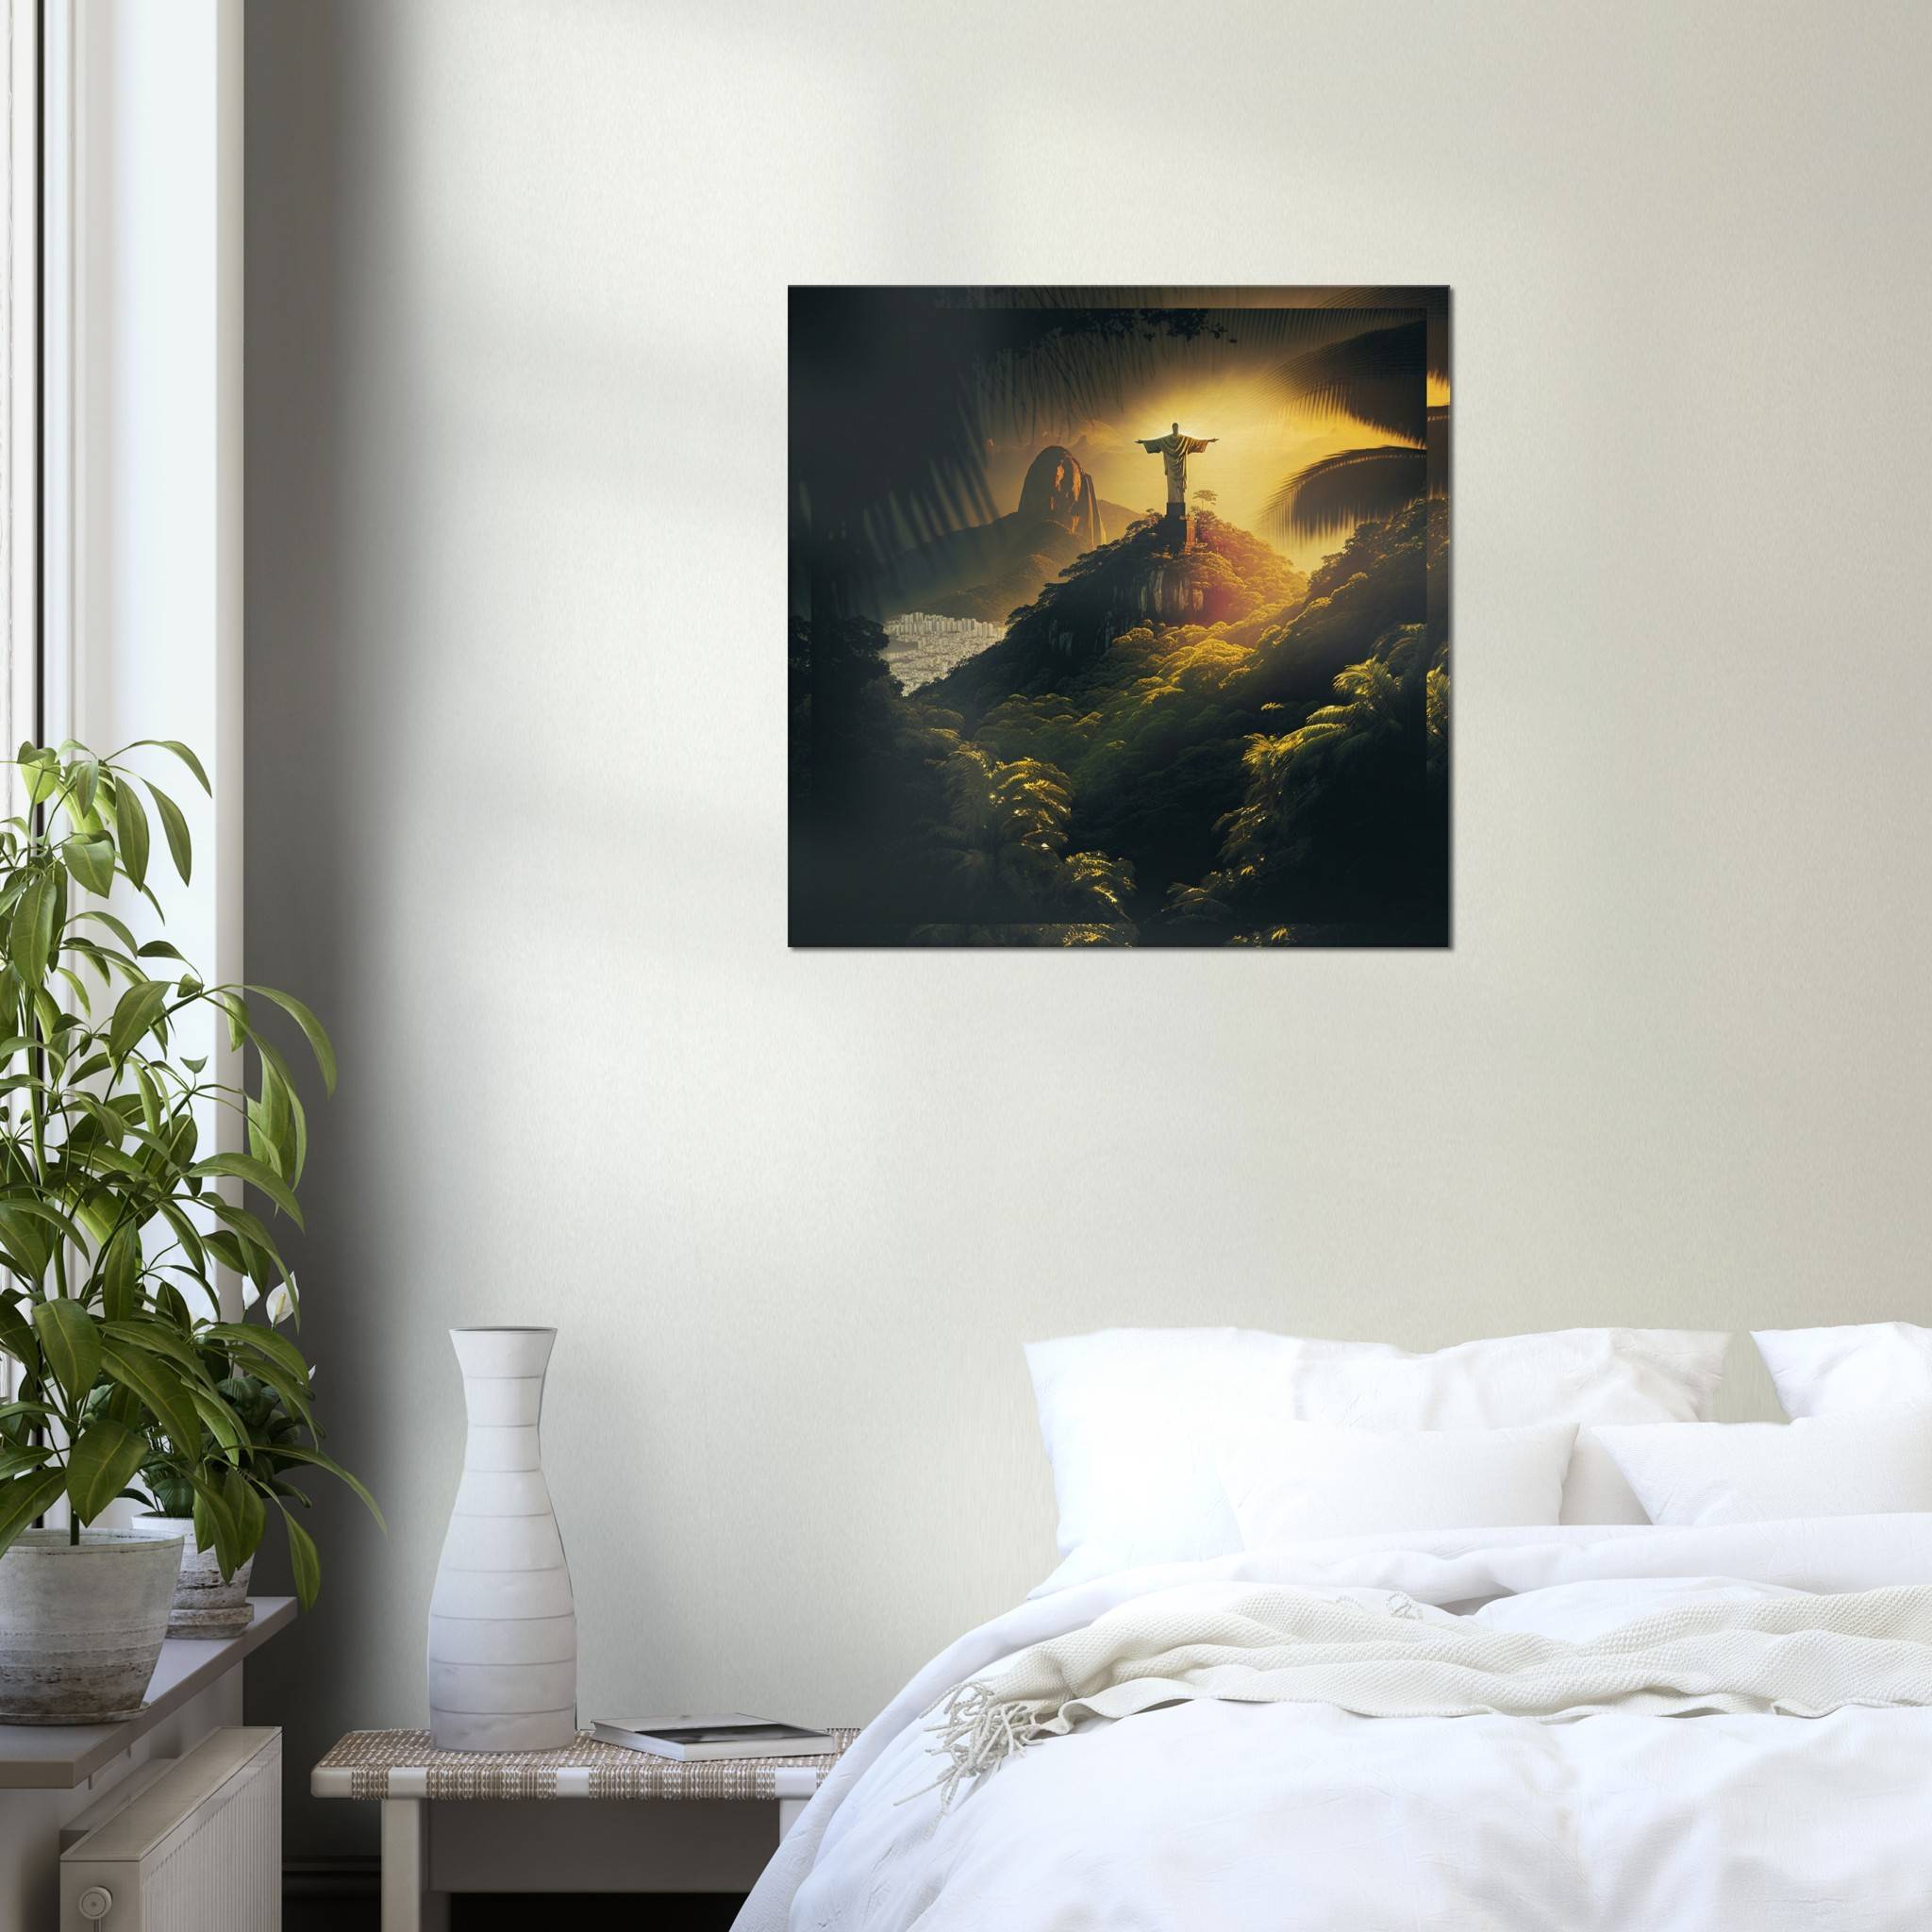 Christ the Redeemer 8 / 60 x 60cm (Canvas Print) Canvas Print Canvas reproduction The Pianist Print On Demand Fabled Gallery https://fabledgallery.art/product/christ-the-redeemer-8-60-x-60cm-canvas-print/